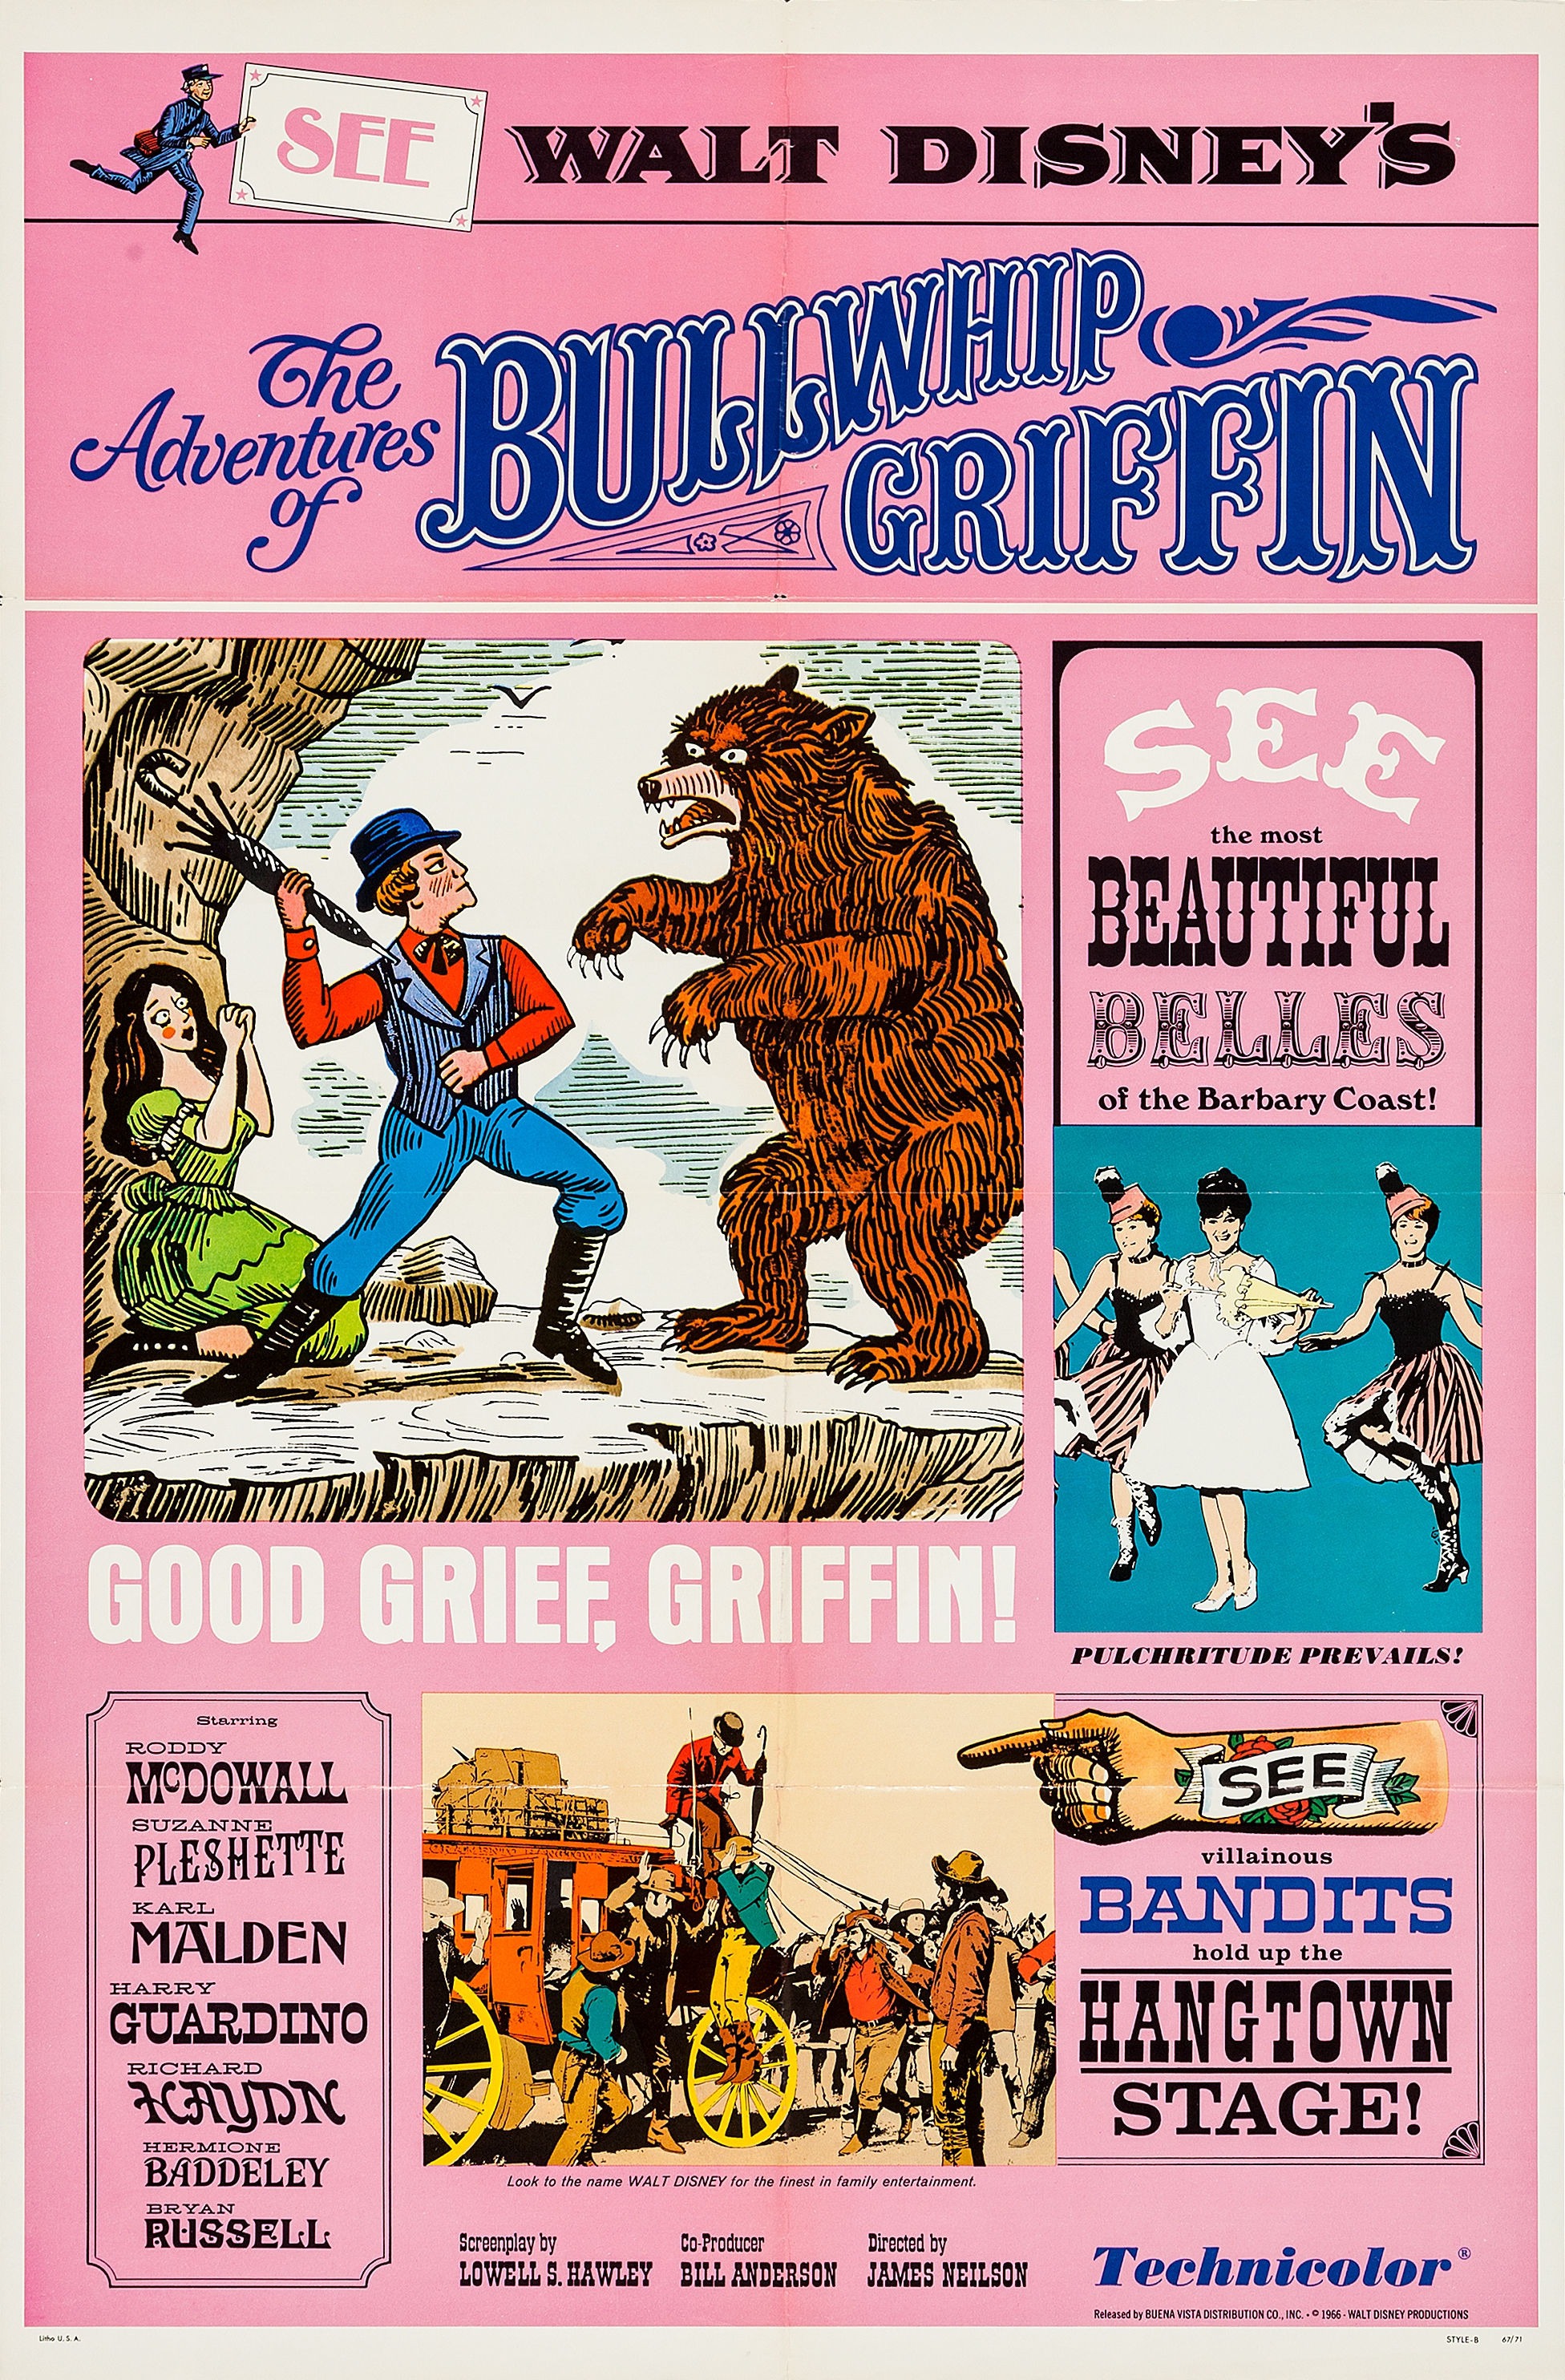 Mega Sized Movie Poster Image for The Adventures of Bullwhip Griffin (#1 of 2)